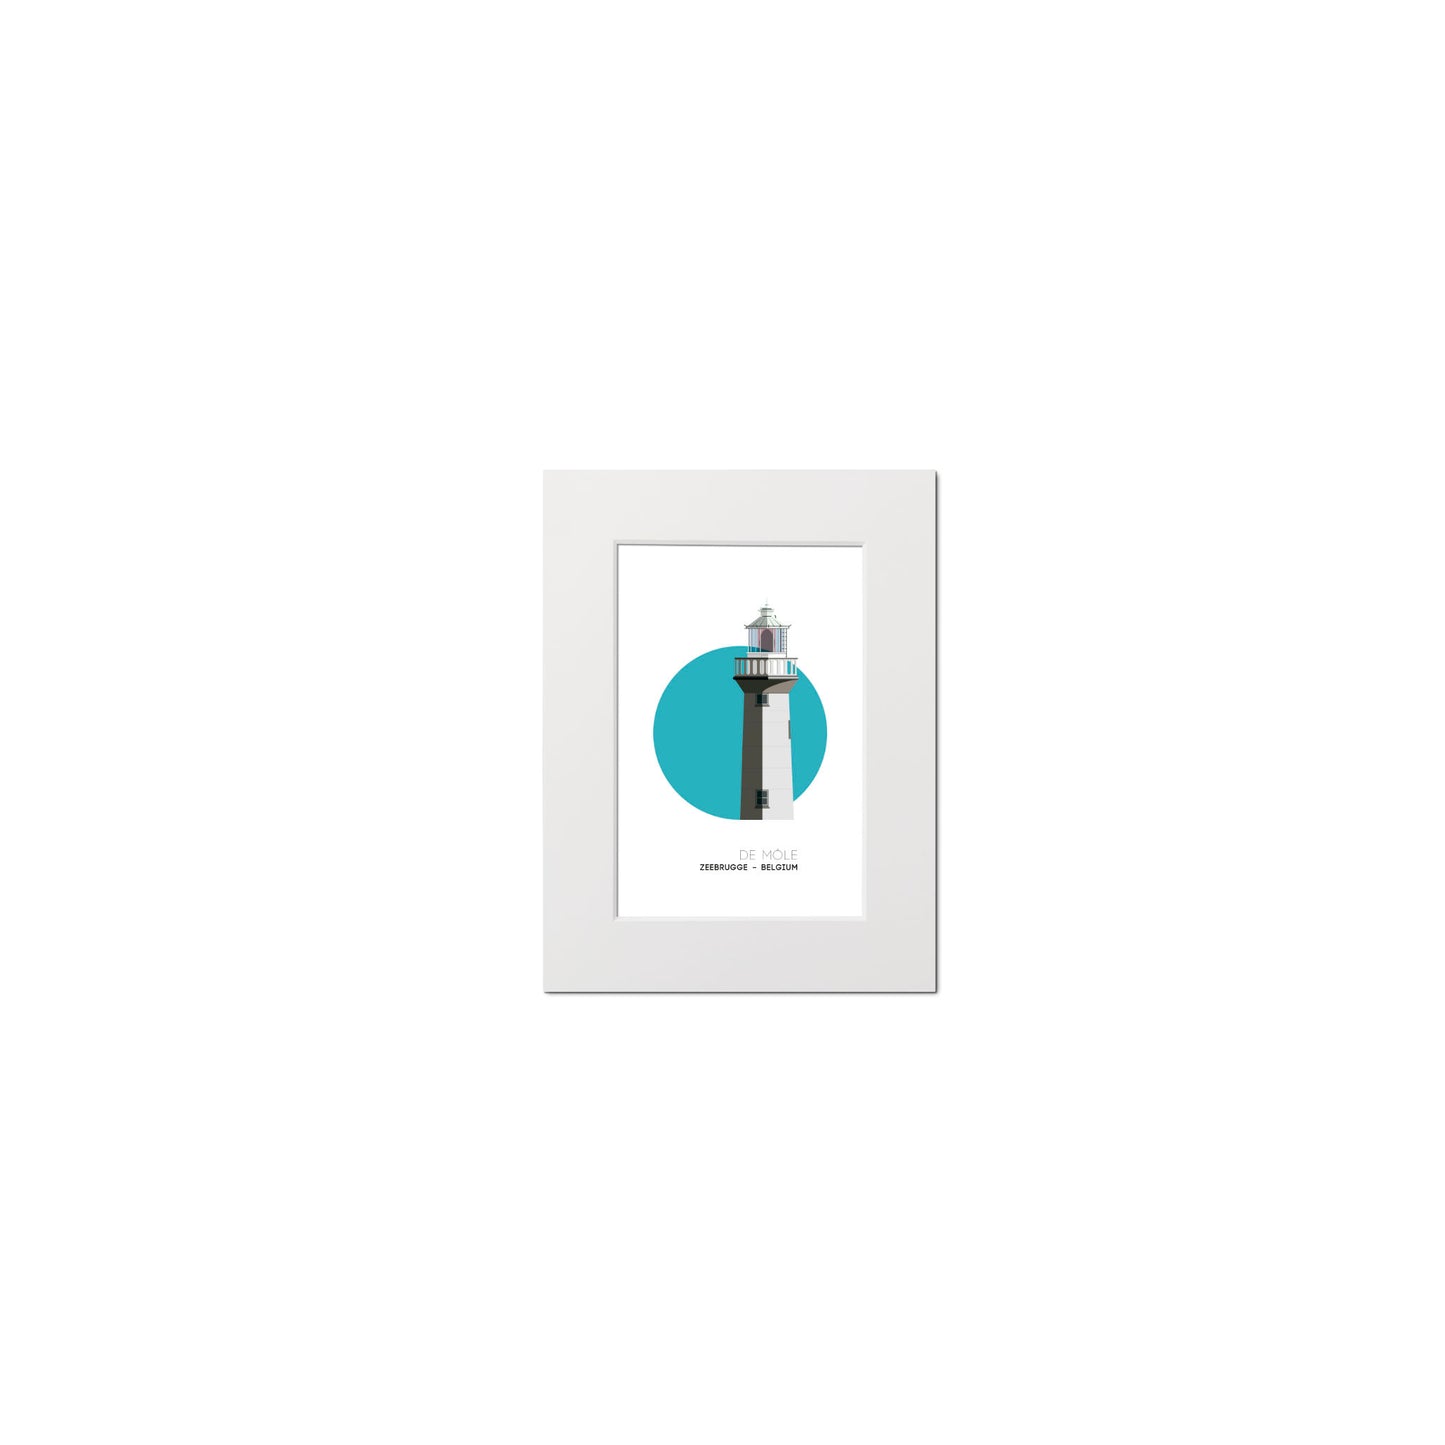 De Môle lighthouse, Zeebrugge Belgium. On a white background with aqua blue circle as a backdrop, mounted and measuring 15x20cm.